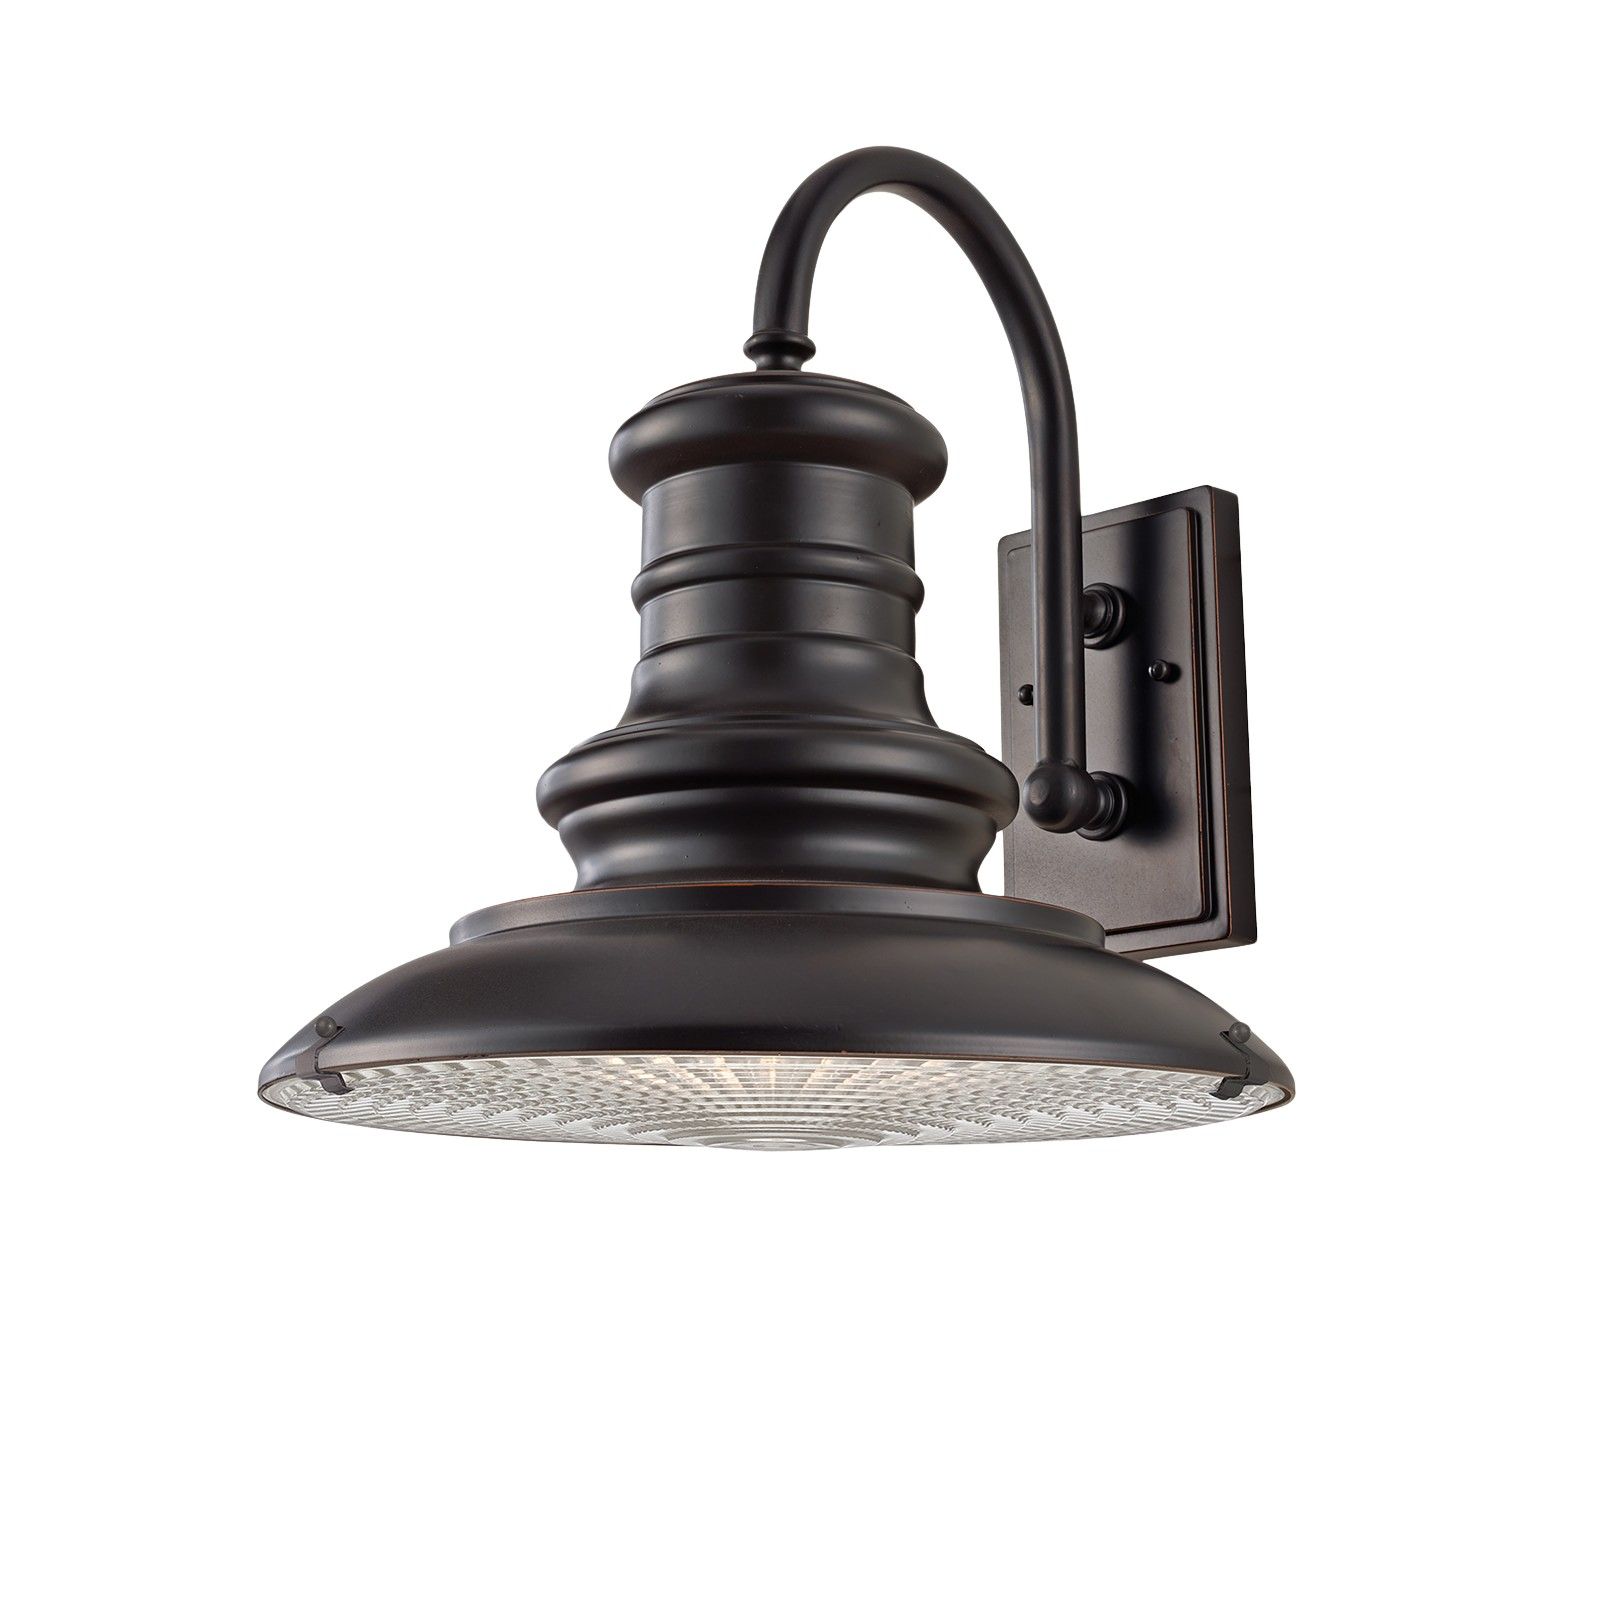 Reading Station wall lantern in a choice of sizes